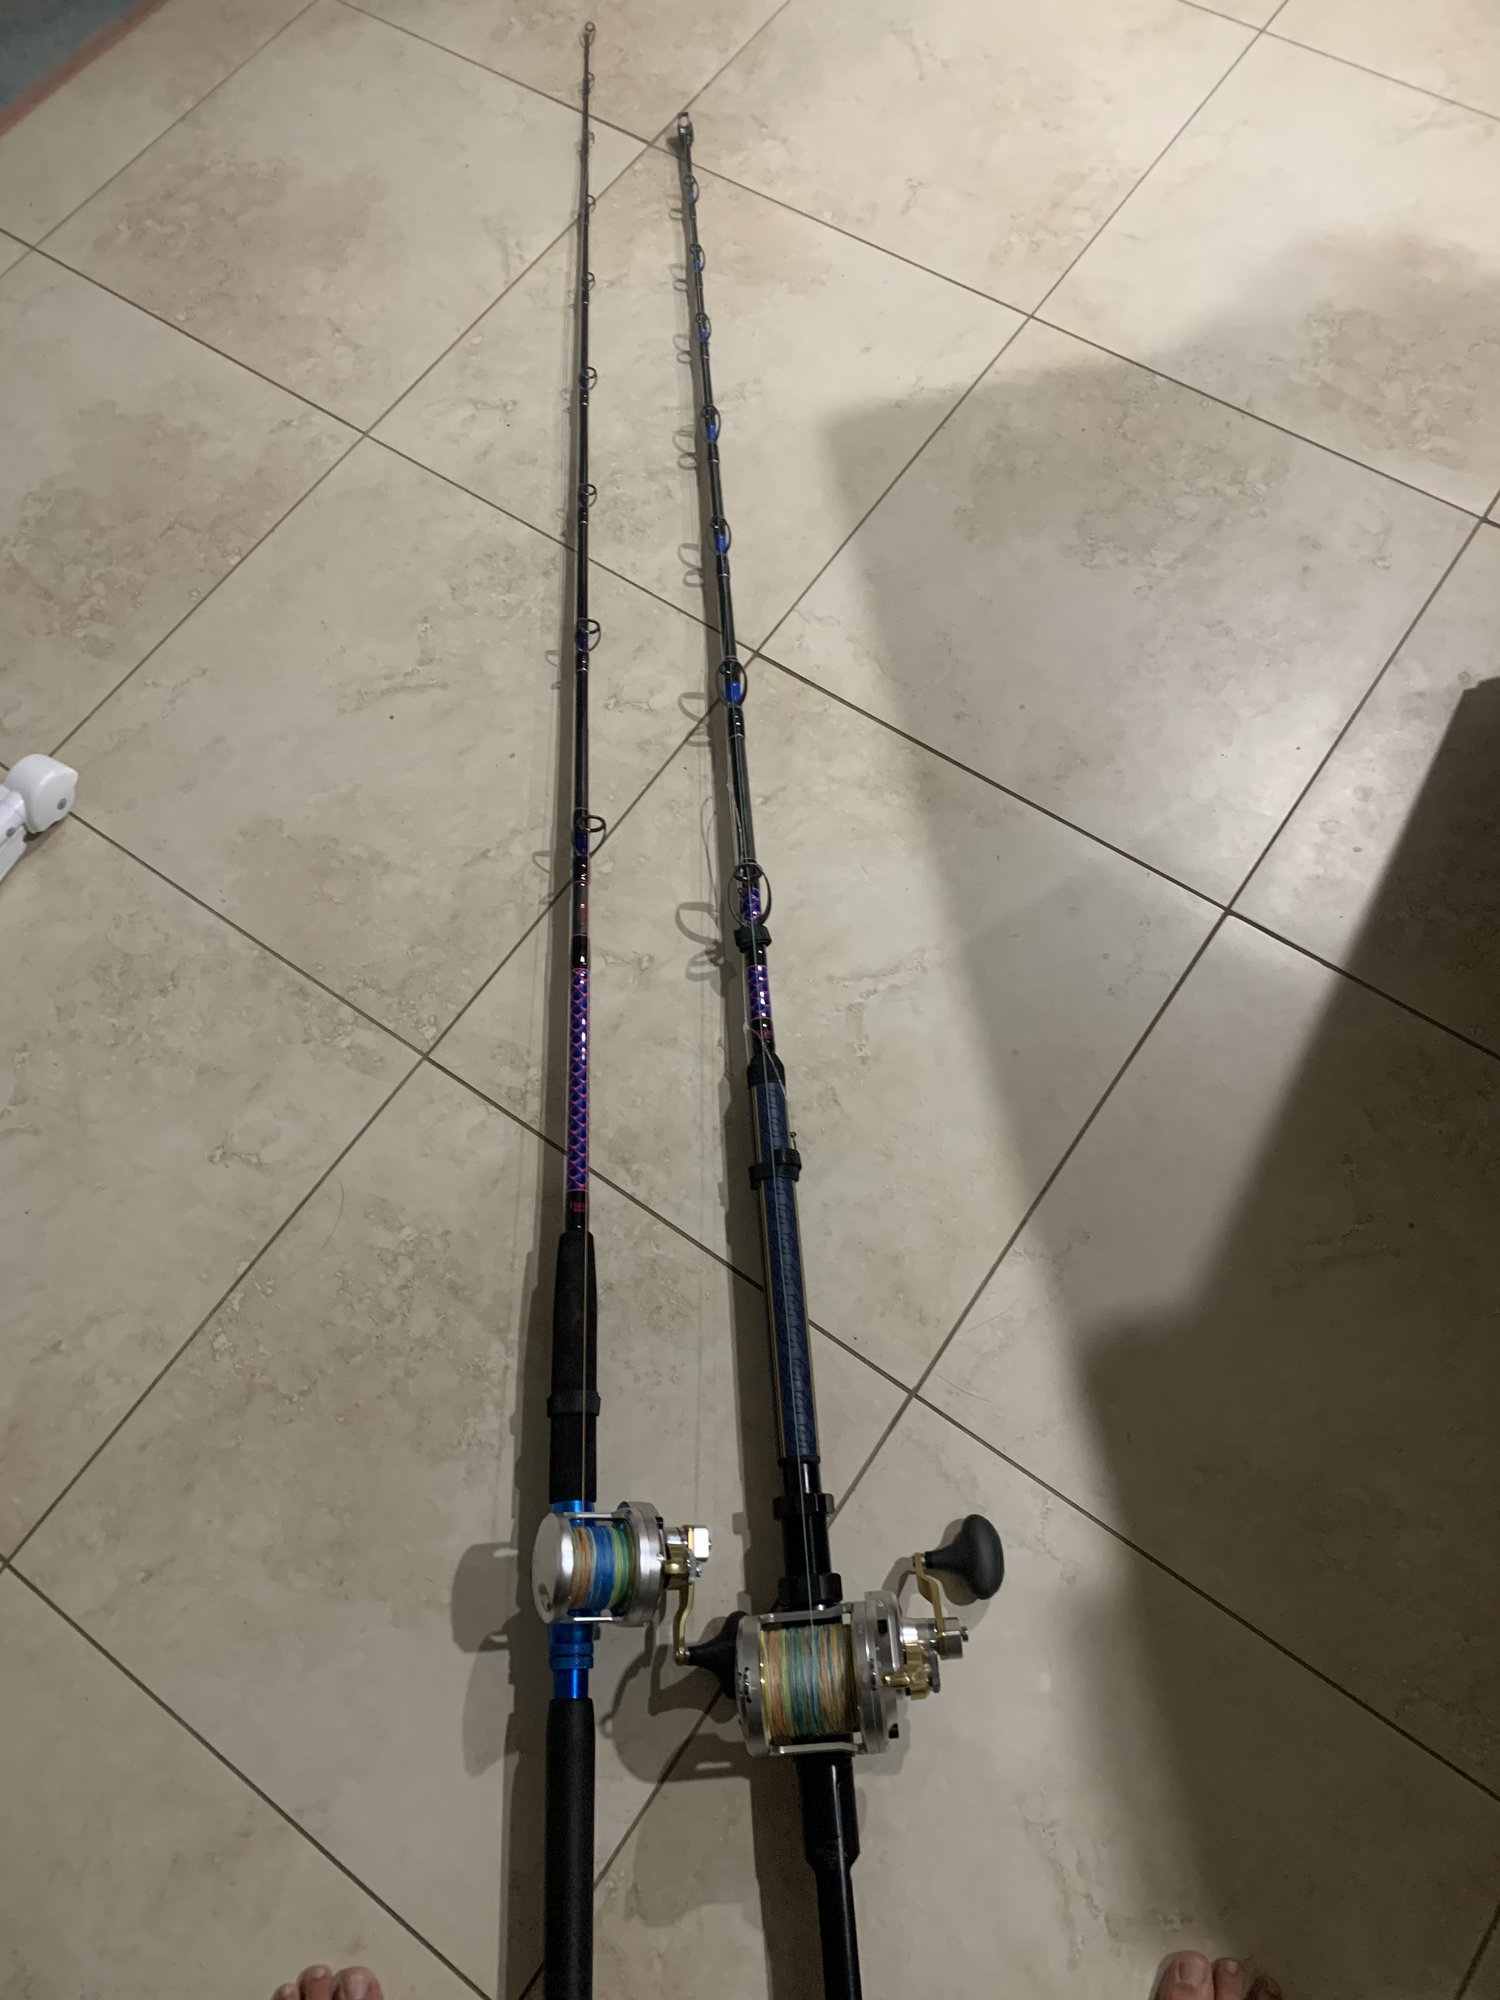 Grouper Reel - Page 2 - The Hull Truth - Boating and Fishing Forum